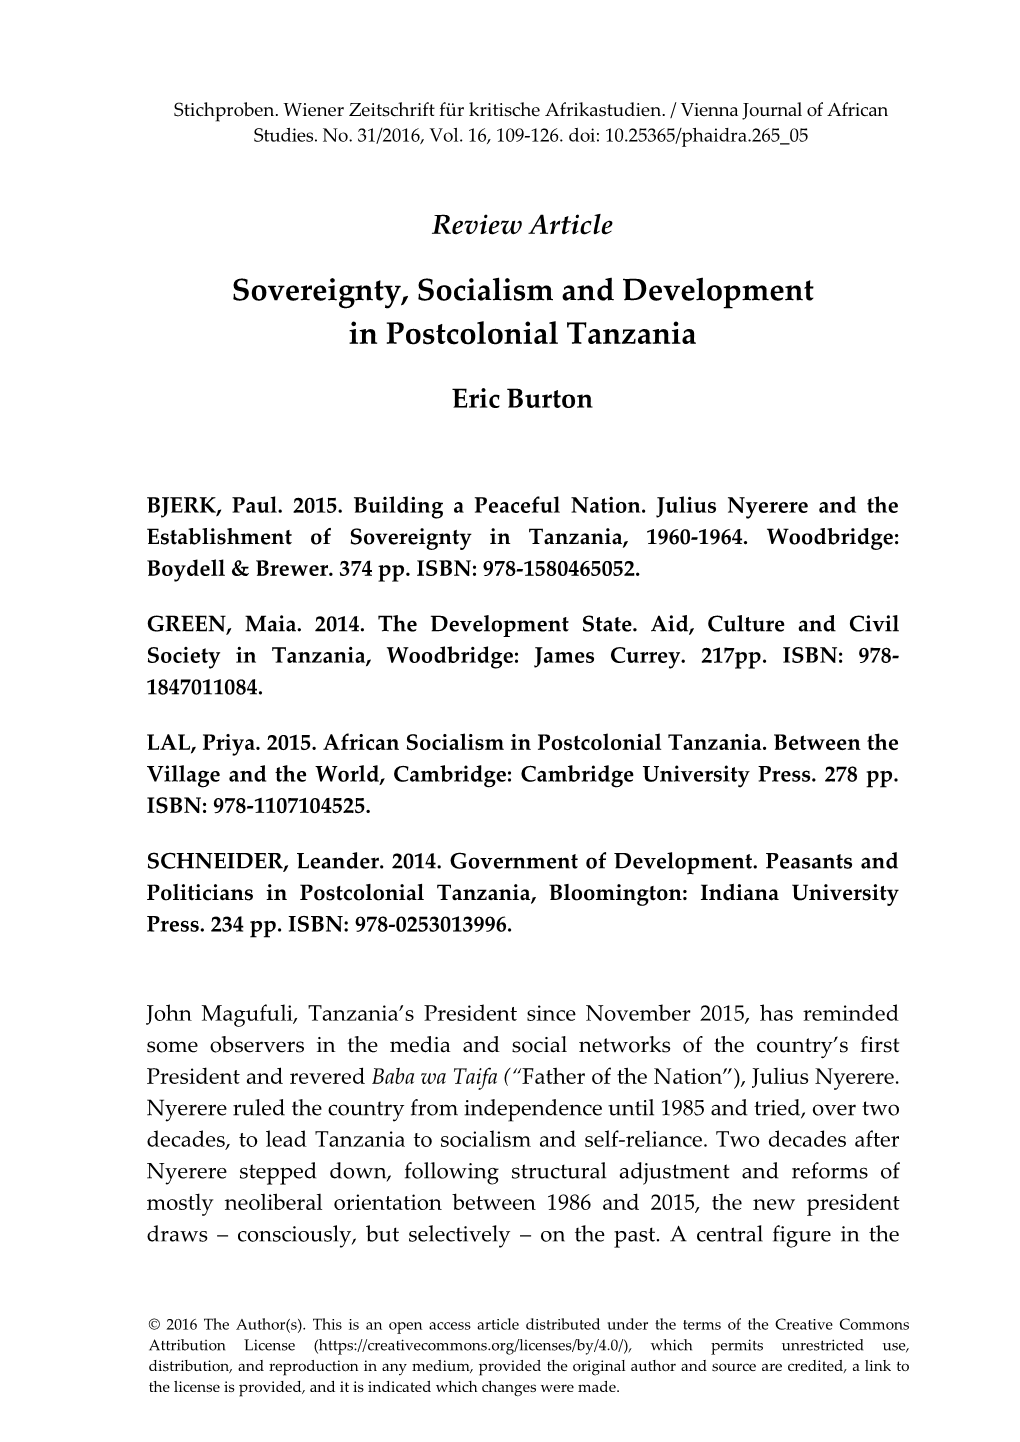 Sovereignty, Socialism and Development in Postcolonial Tanzania